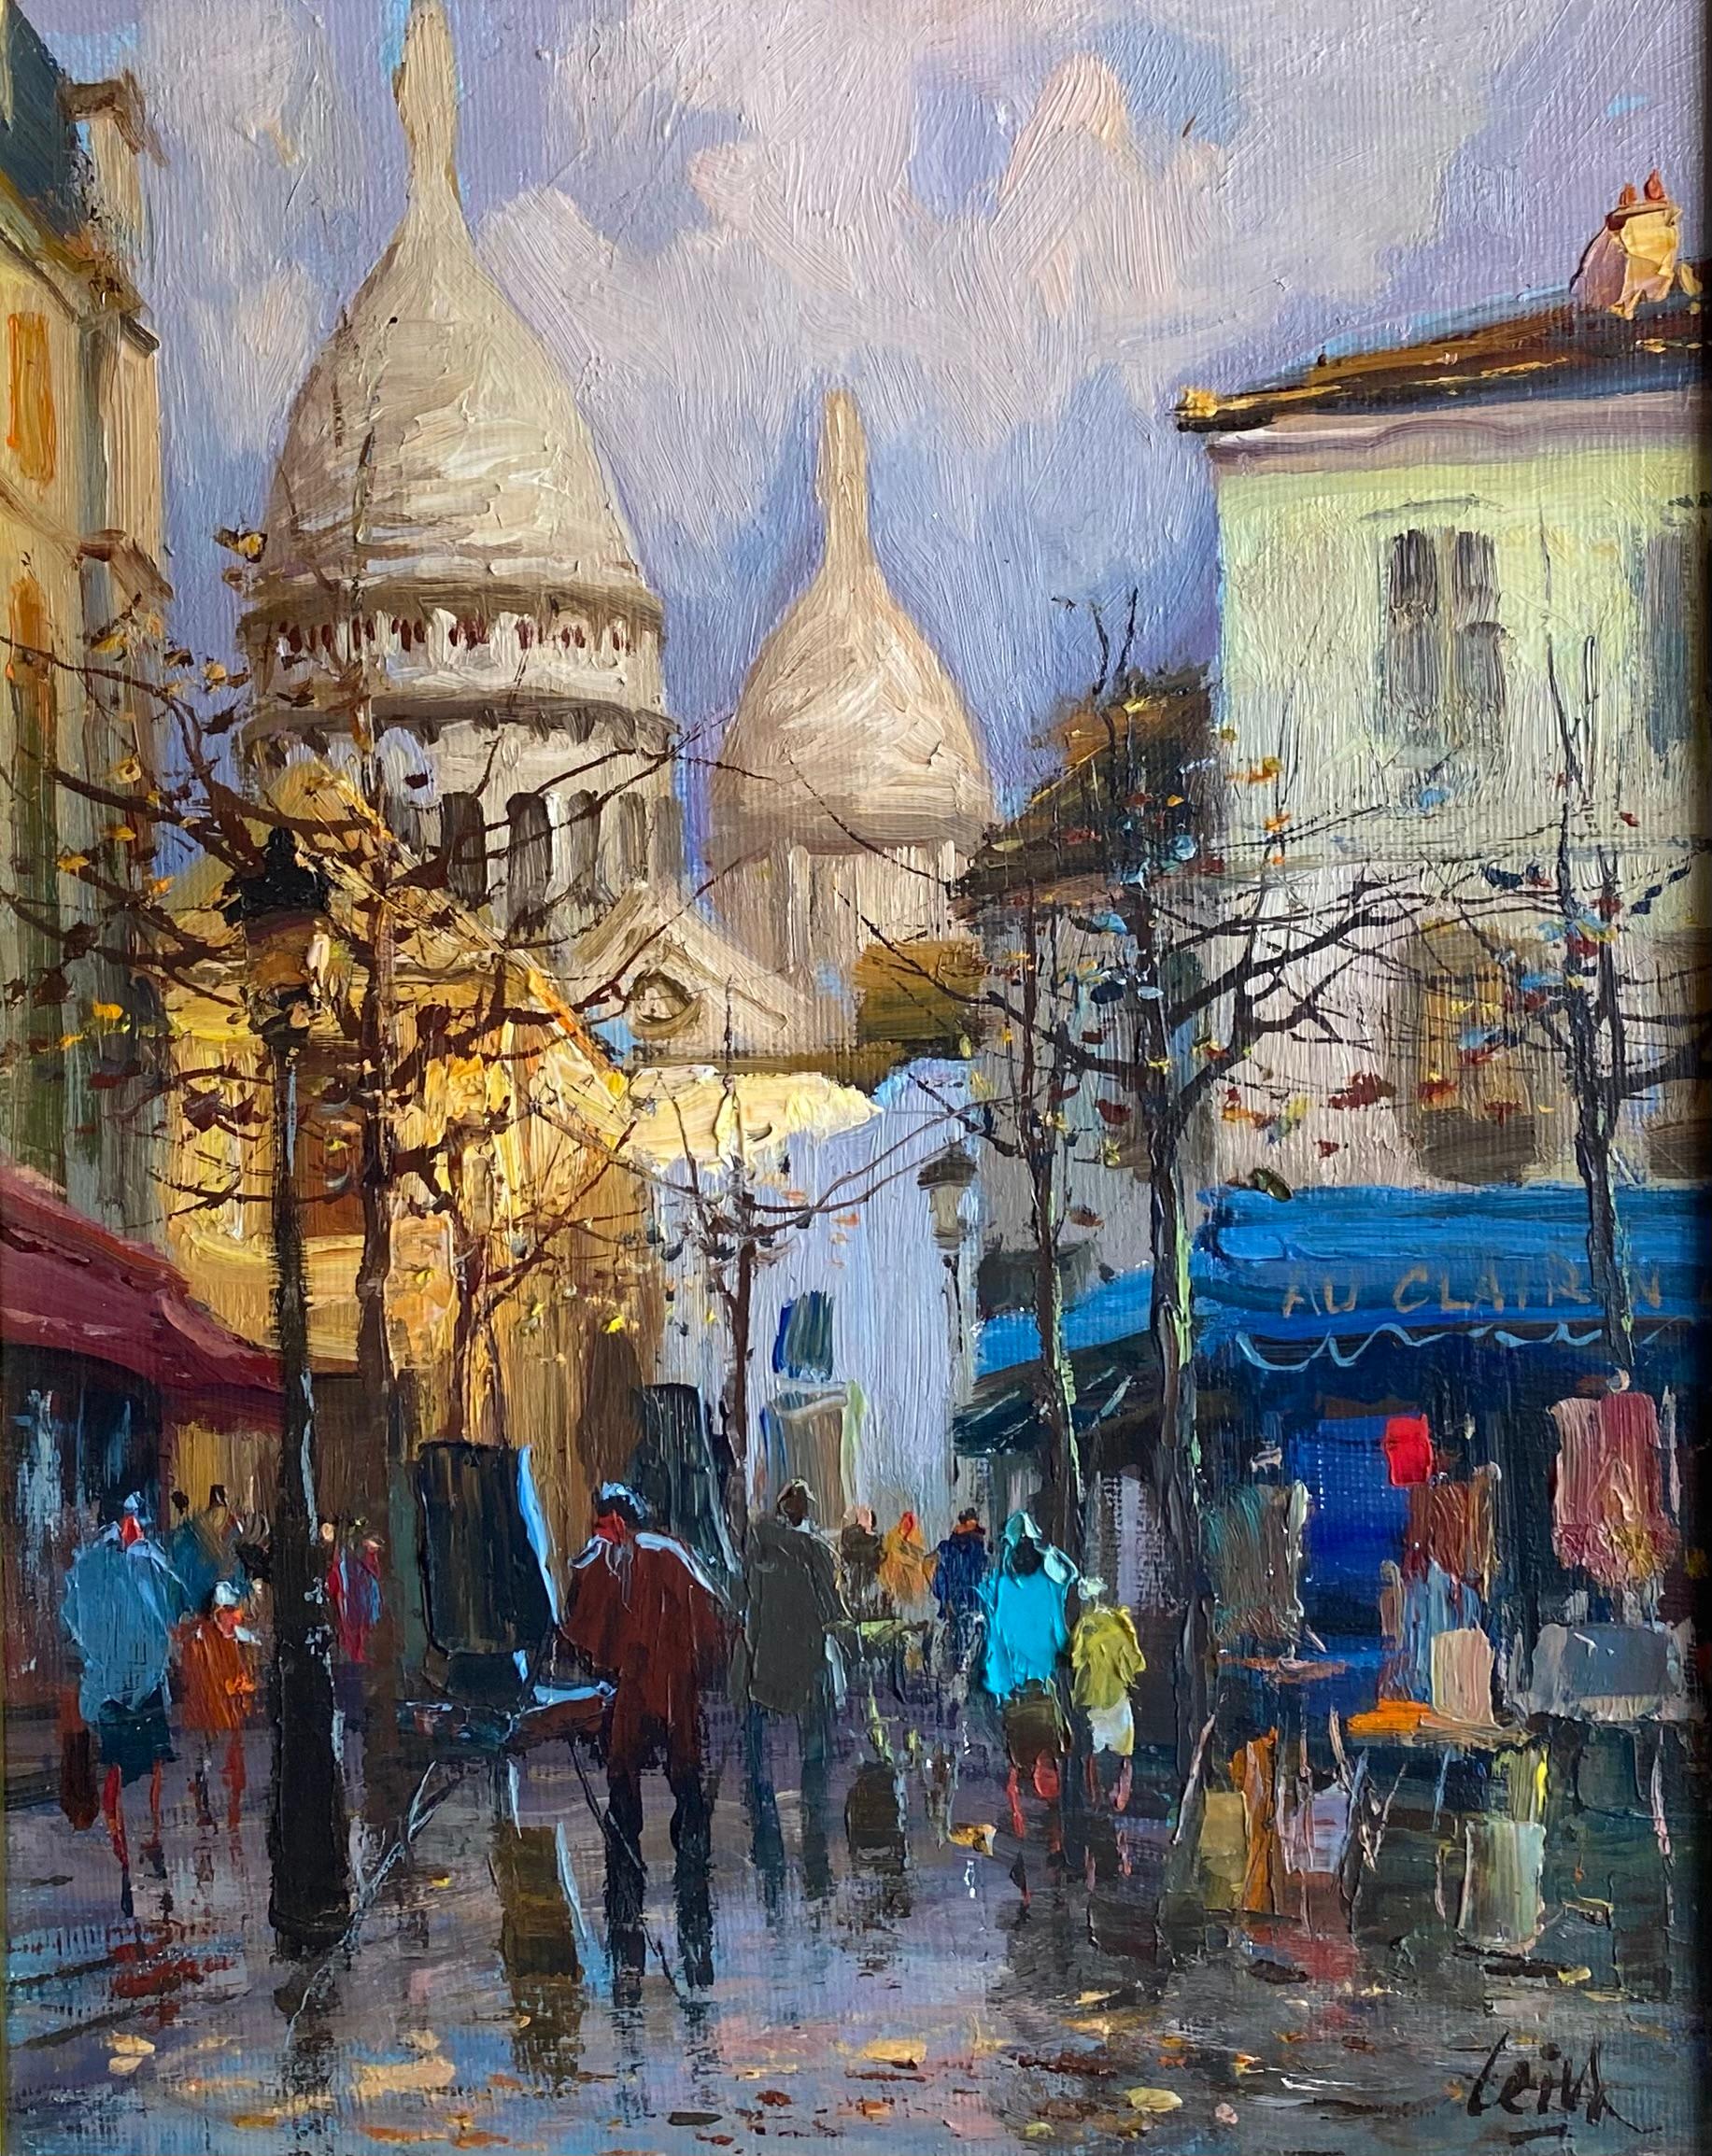 Exquisite orginal oil painting of the Place du  Tertre in Montmartre, Paris by the well known artist, Jose Luis Leiva.  Beautiful vibrant colors and use of light and shadows. The landmark church Sacre Coeur in the background of the Place du Tertre.